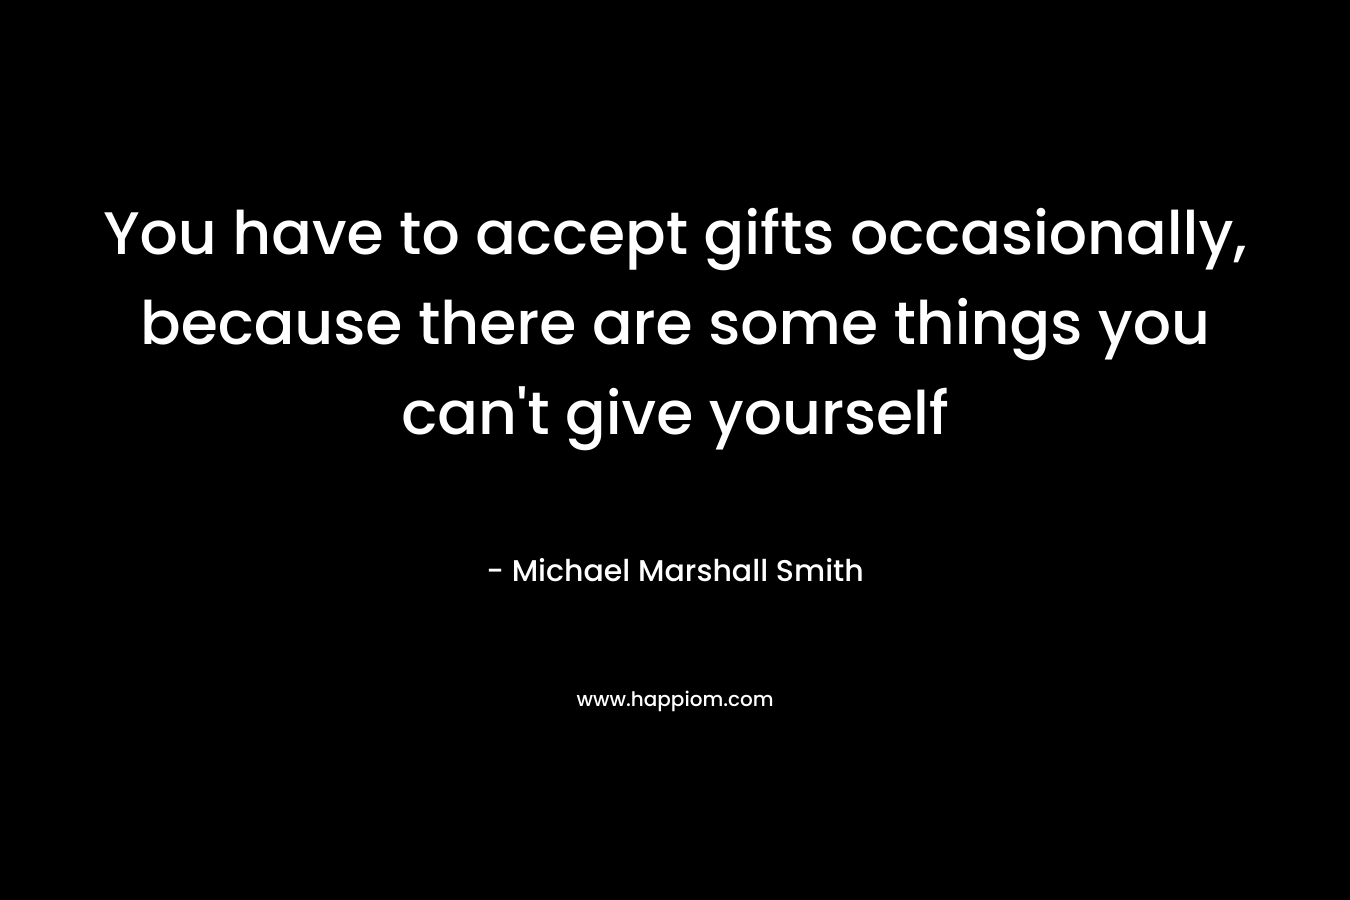 You have to accept gifts occasionally, because there are some things you can't give yourself